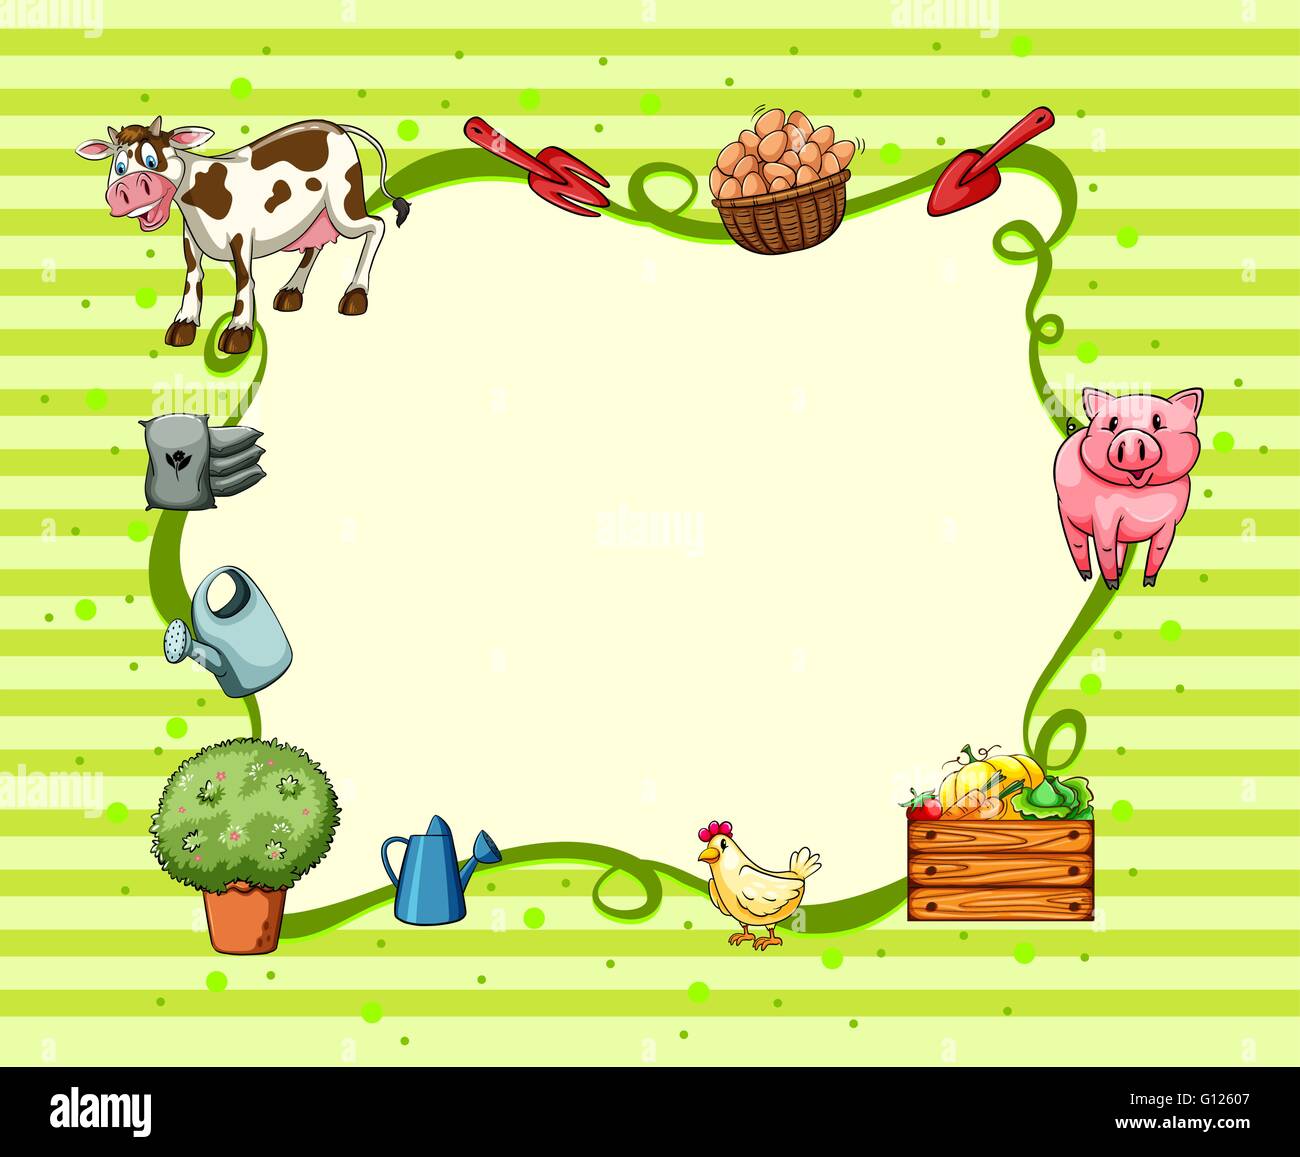 Border design with farm animals and things illustration Stock Vector